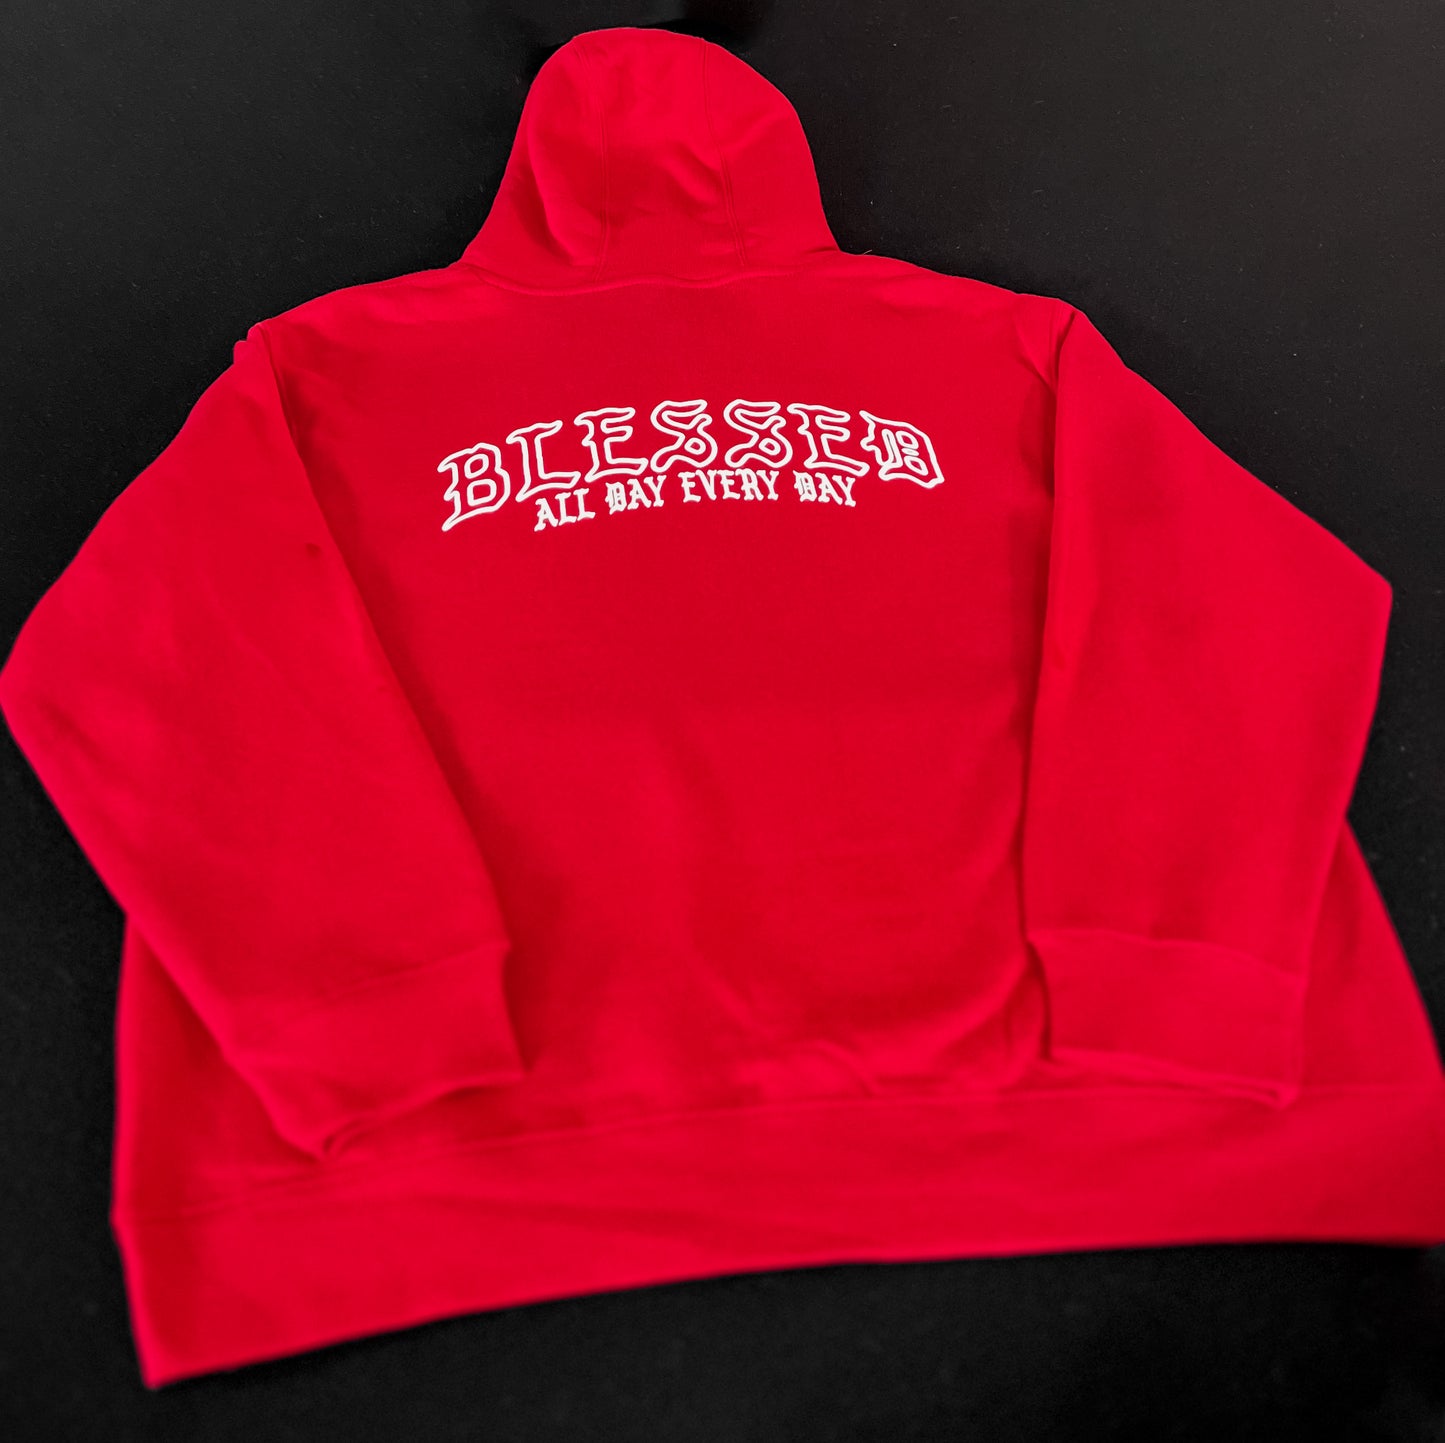 Blessed All Day Every Day Hoodie - OIAL | Confidence, Inspiration & Empowerment